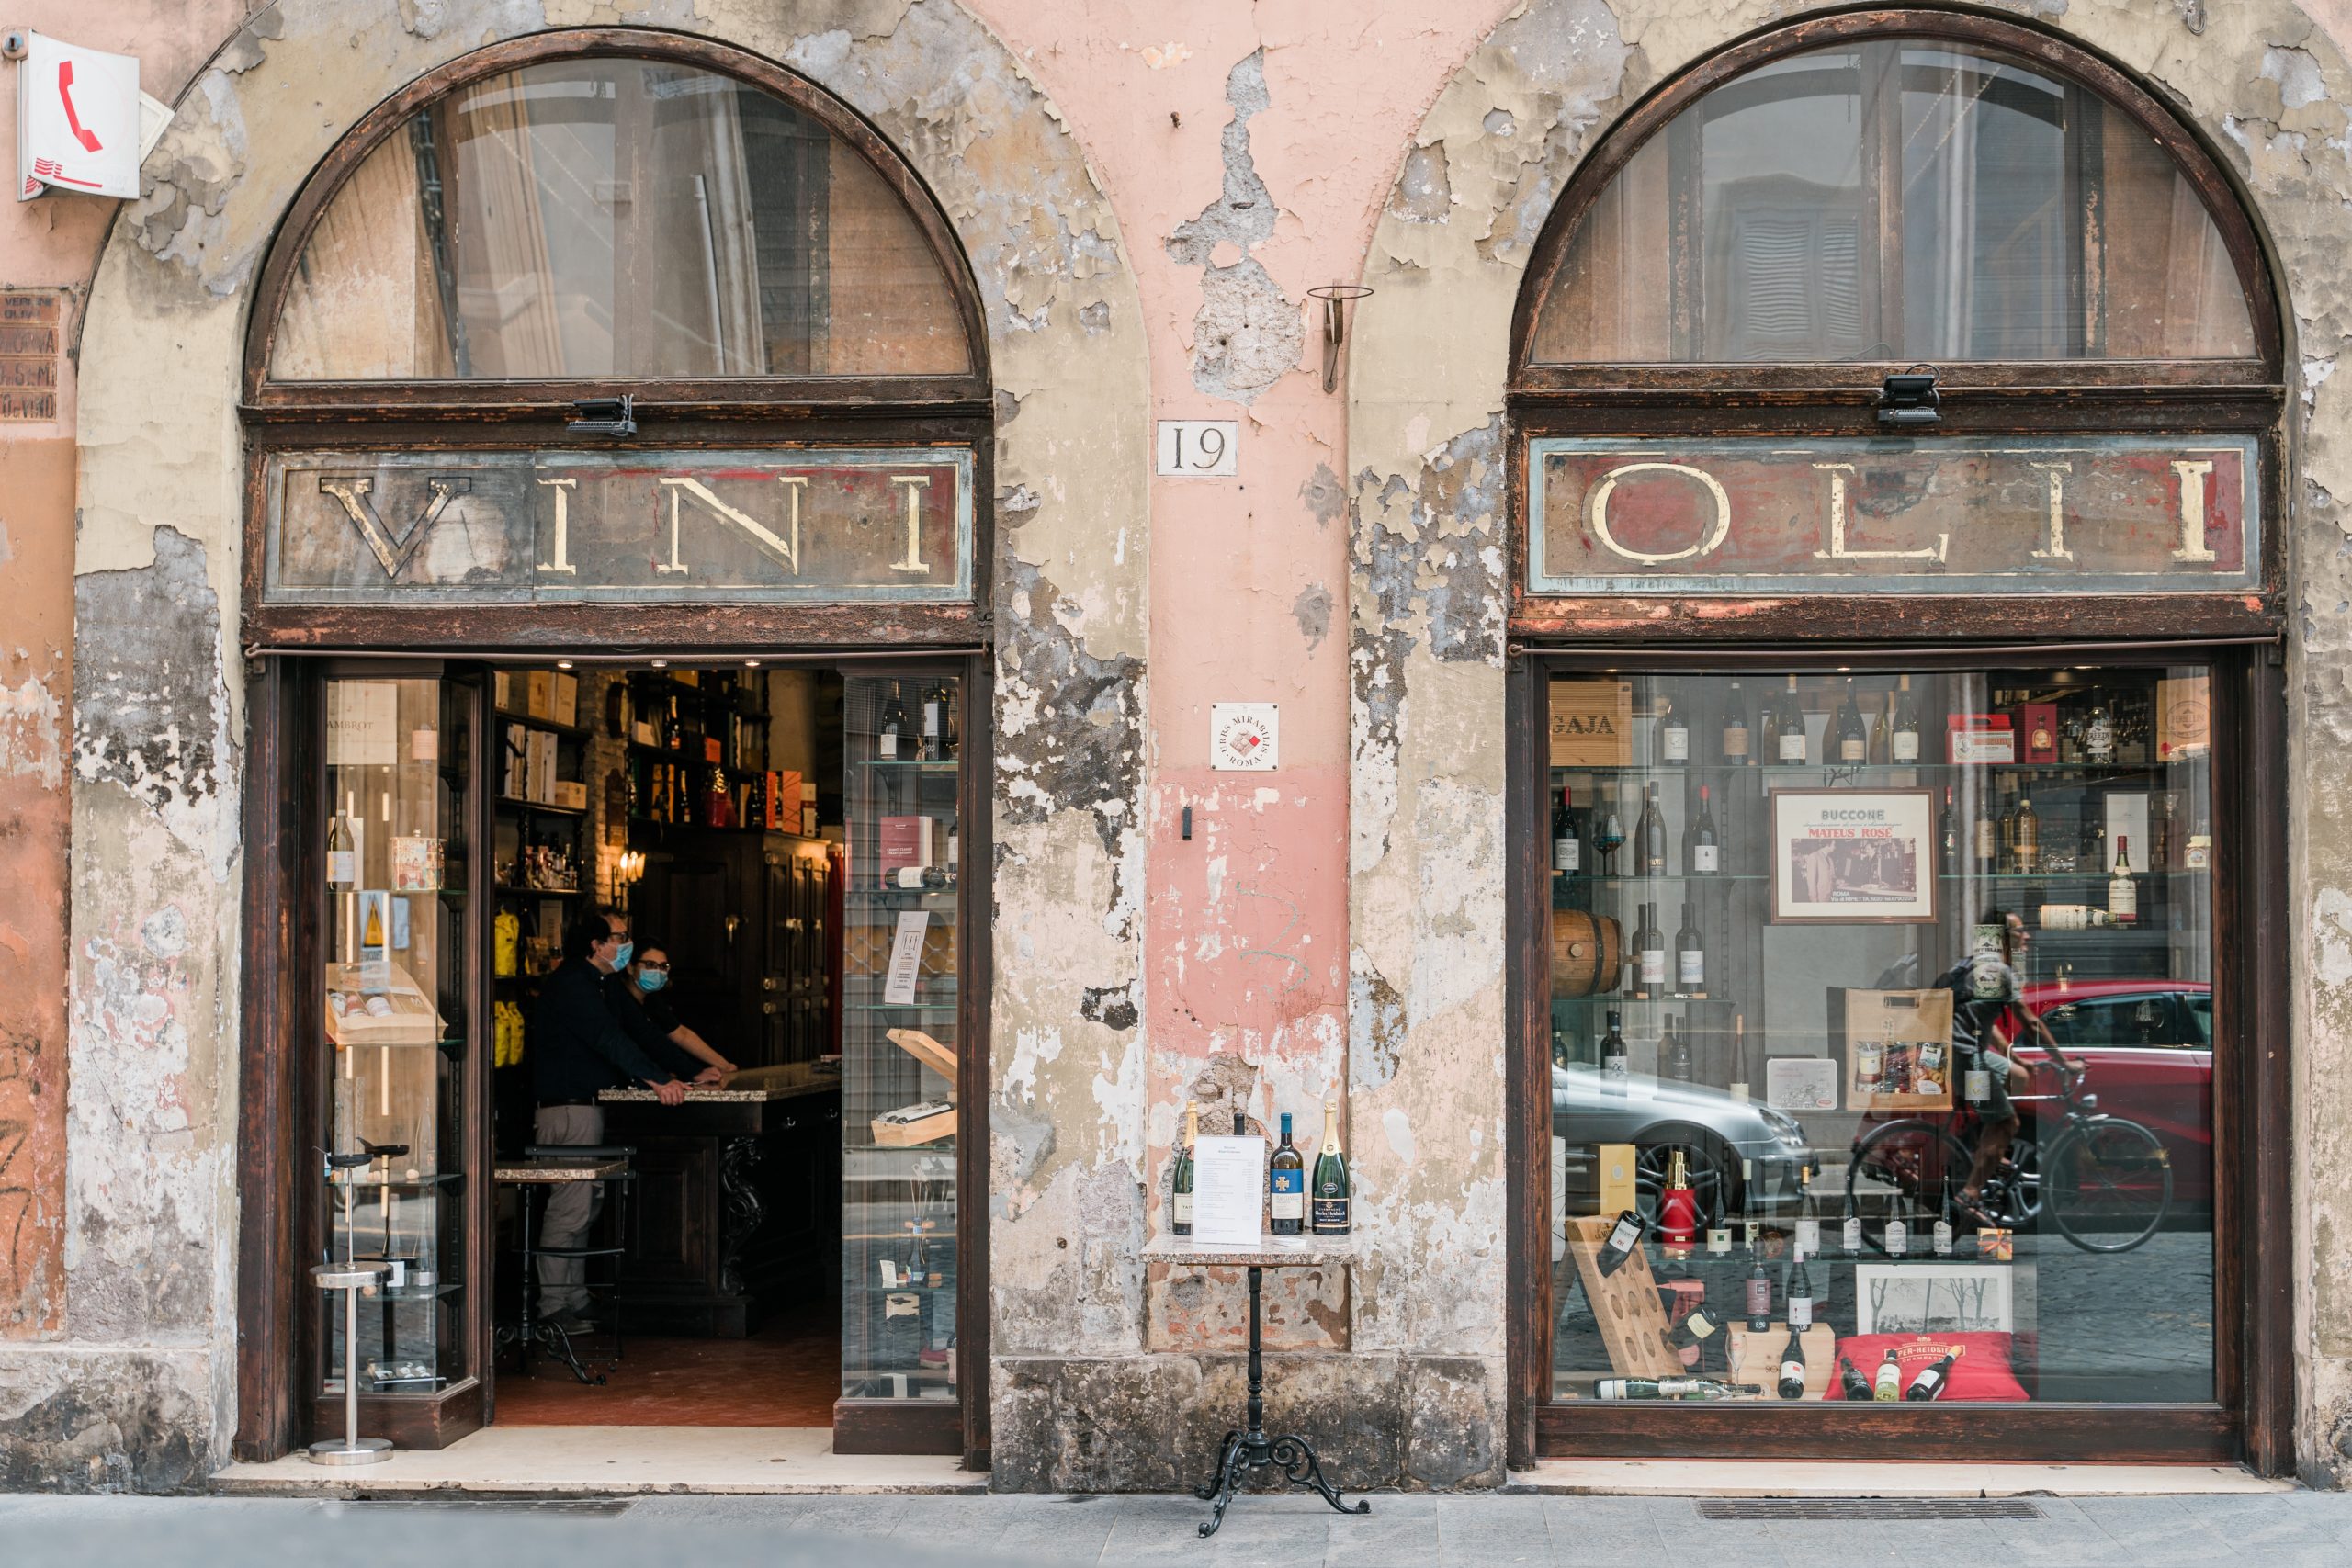 15 Italian Tongue Twisters to Improve Your Pronunciation